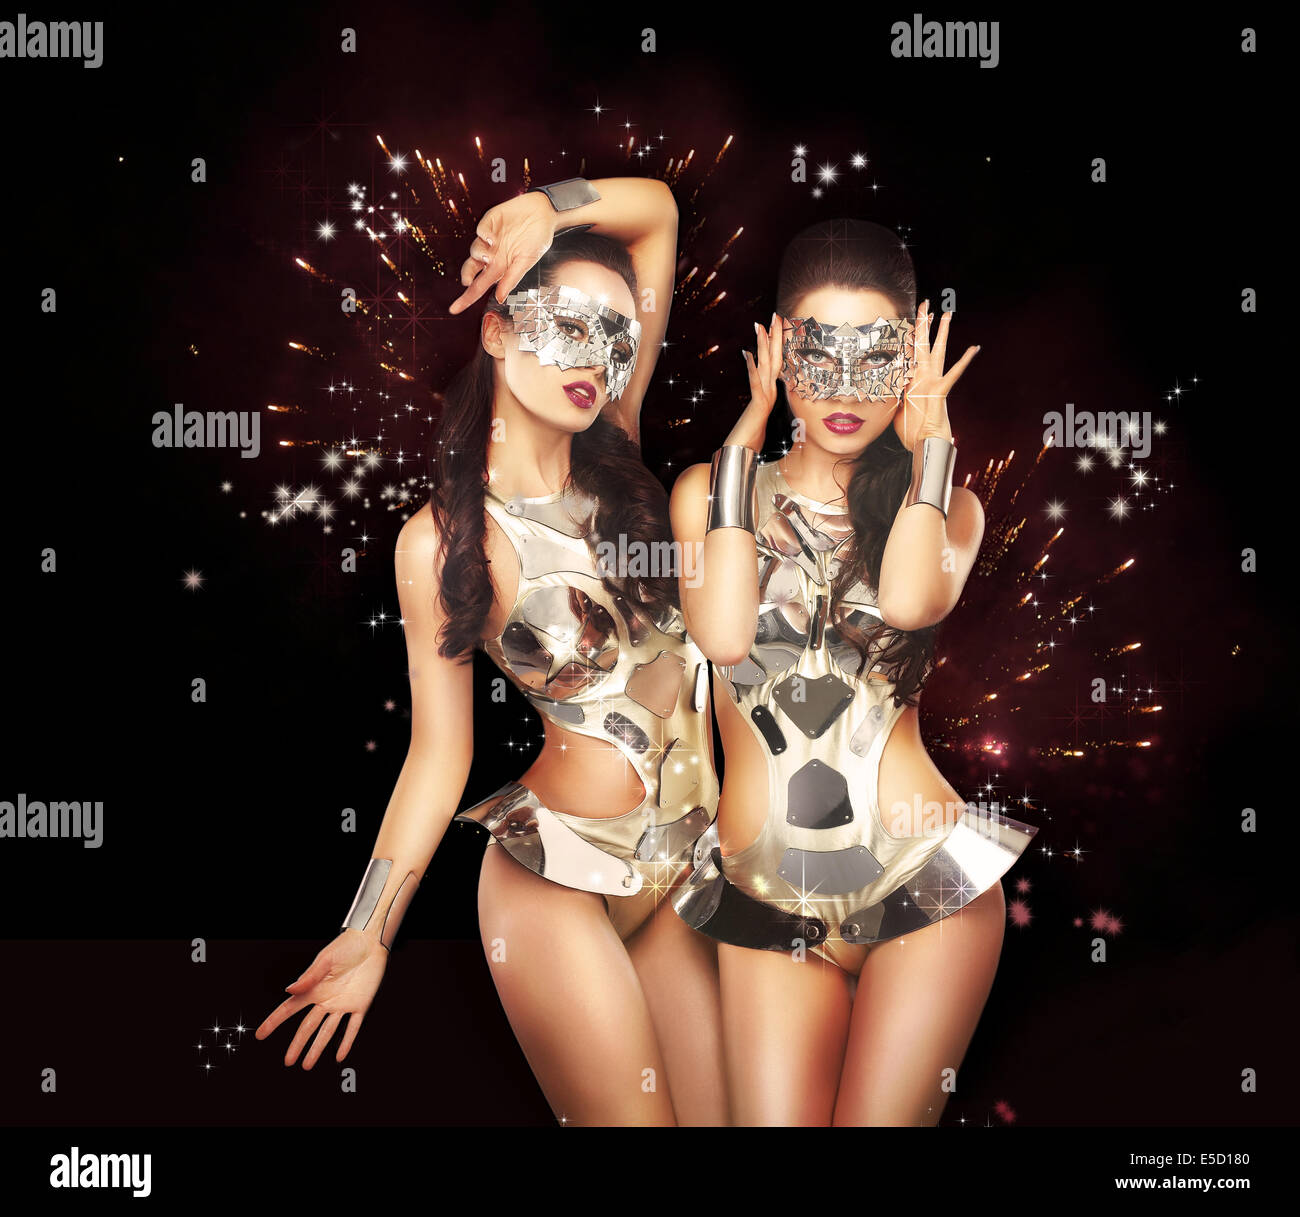 Firework & Fancy Dress Party. Showgirls over Sparkling Background Stock Photo